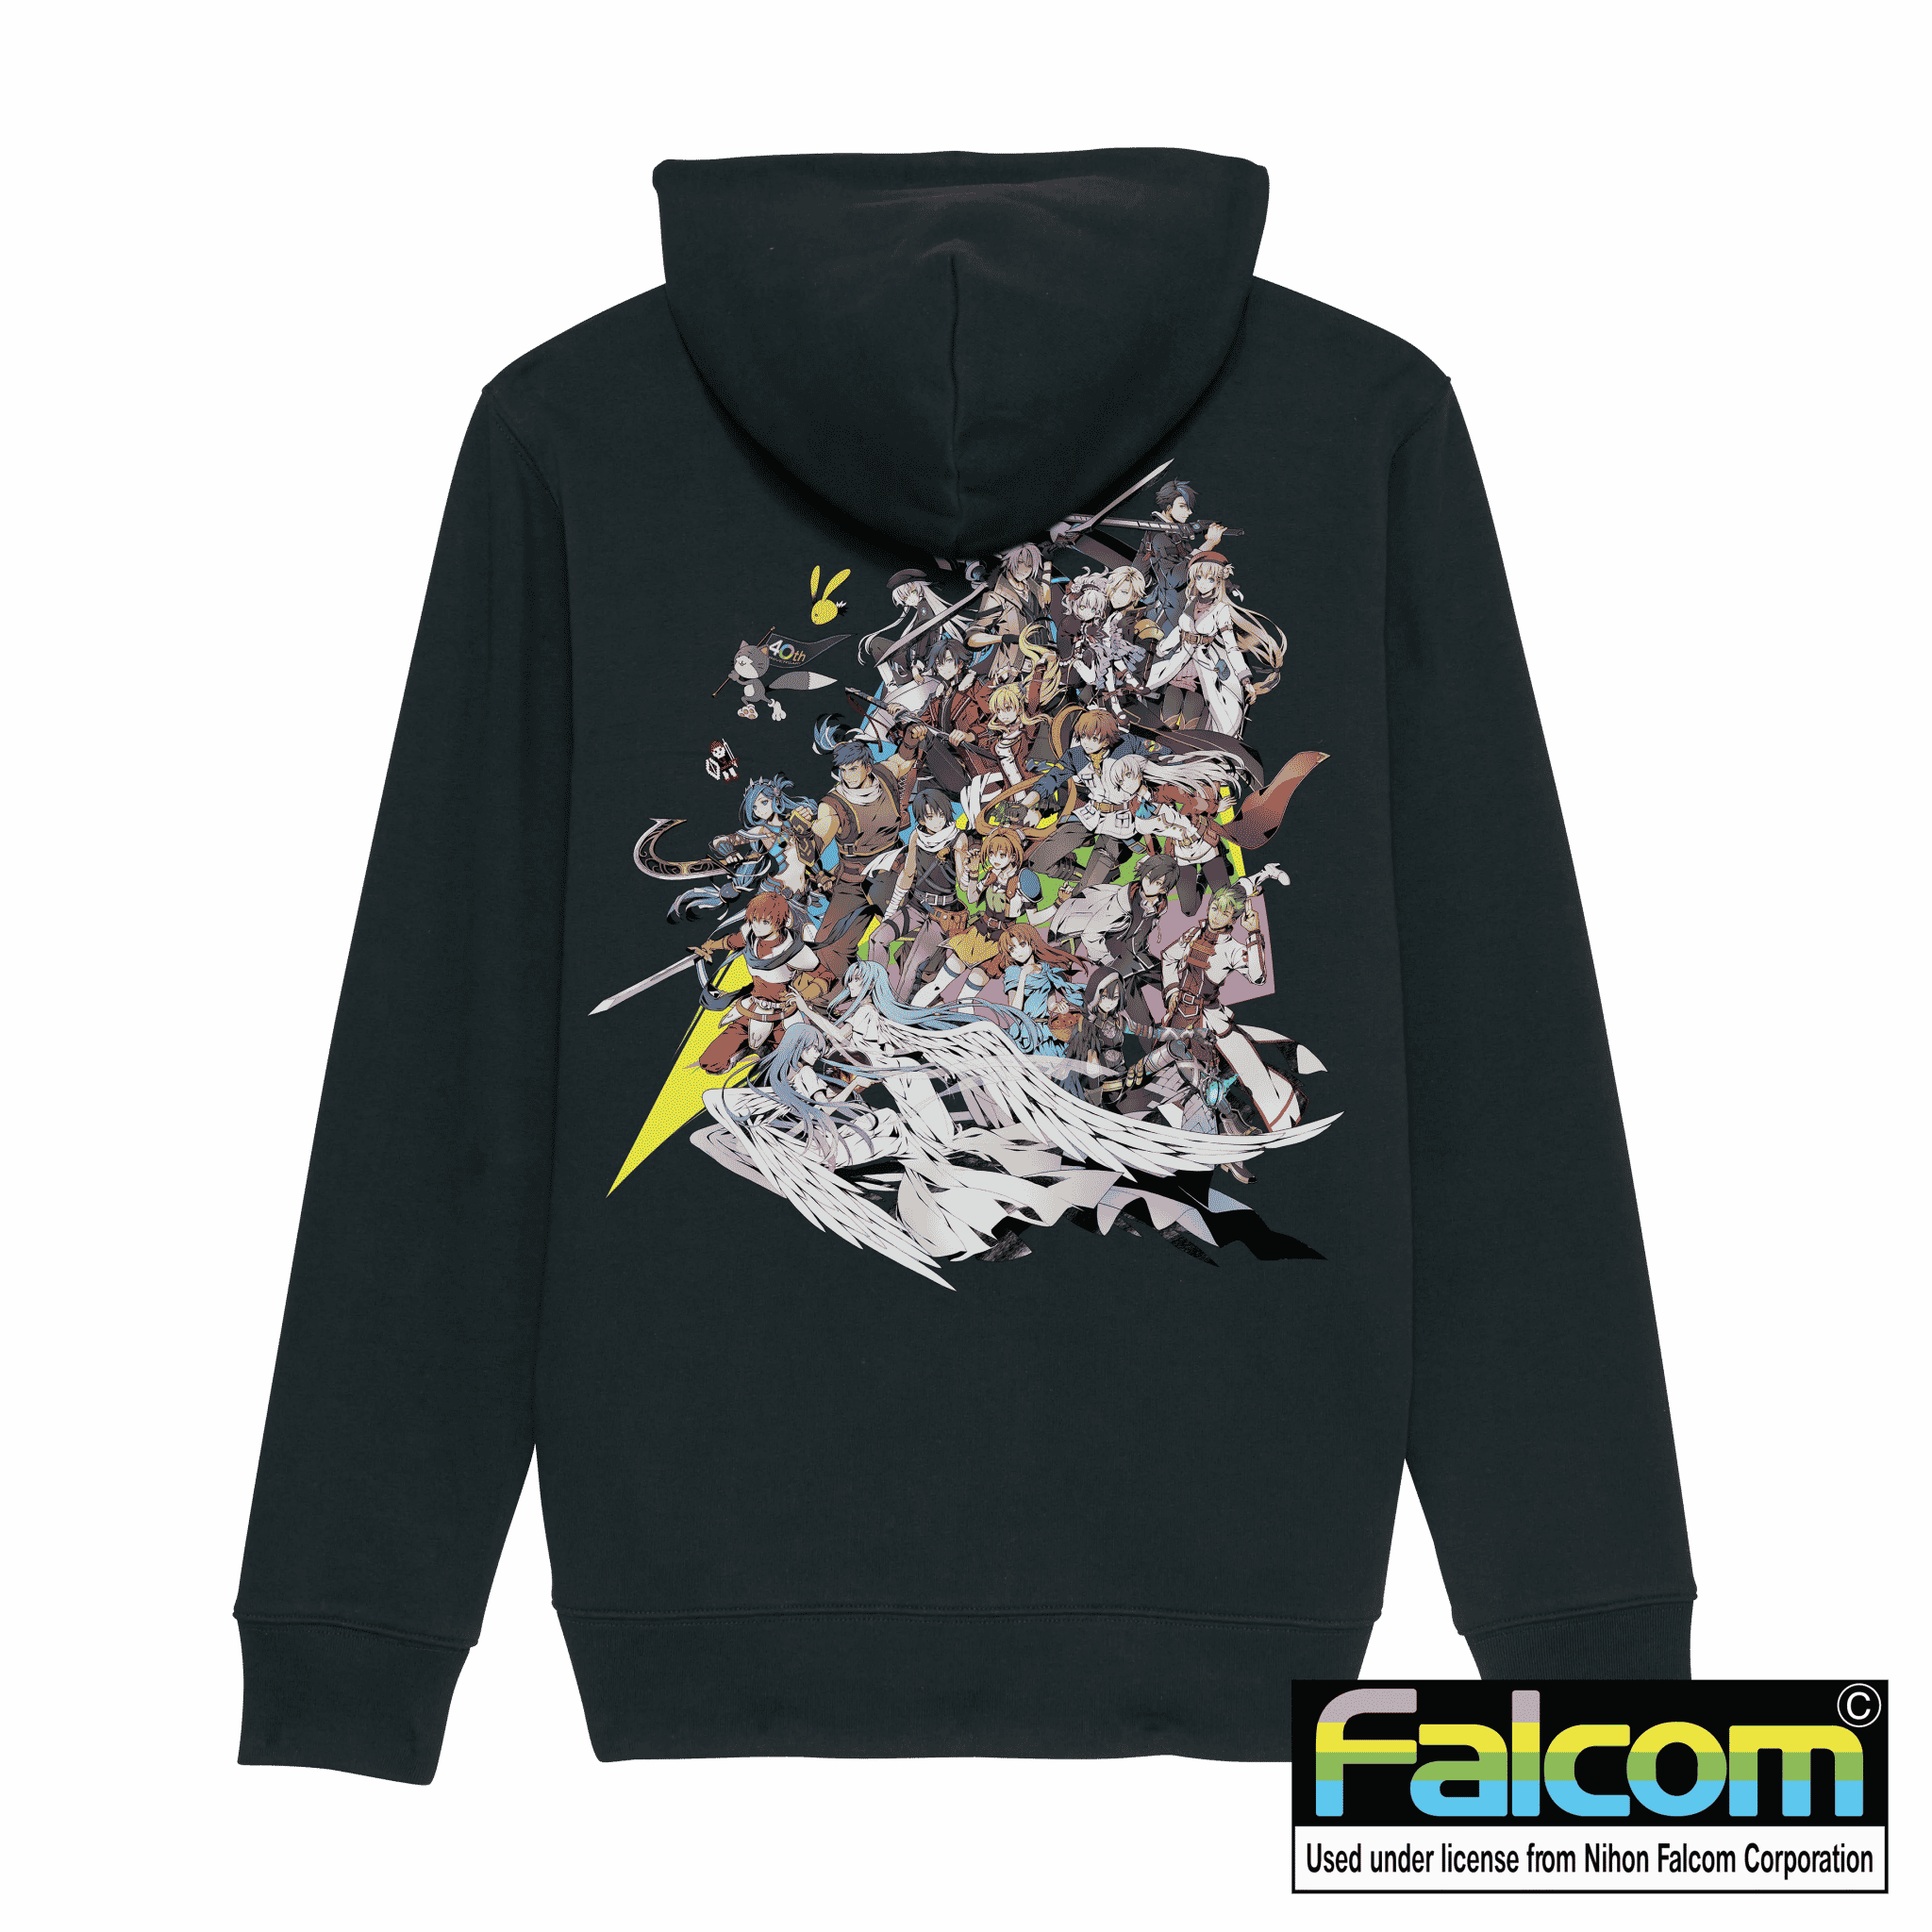 Falcom 40th Anniversary Hoodies Available for Pre-Order